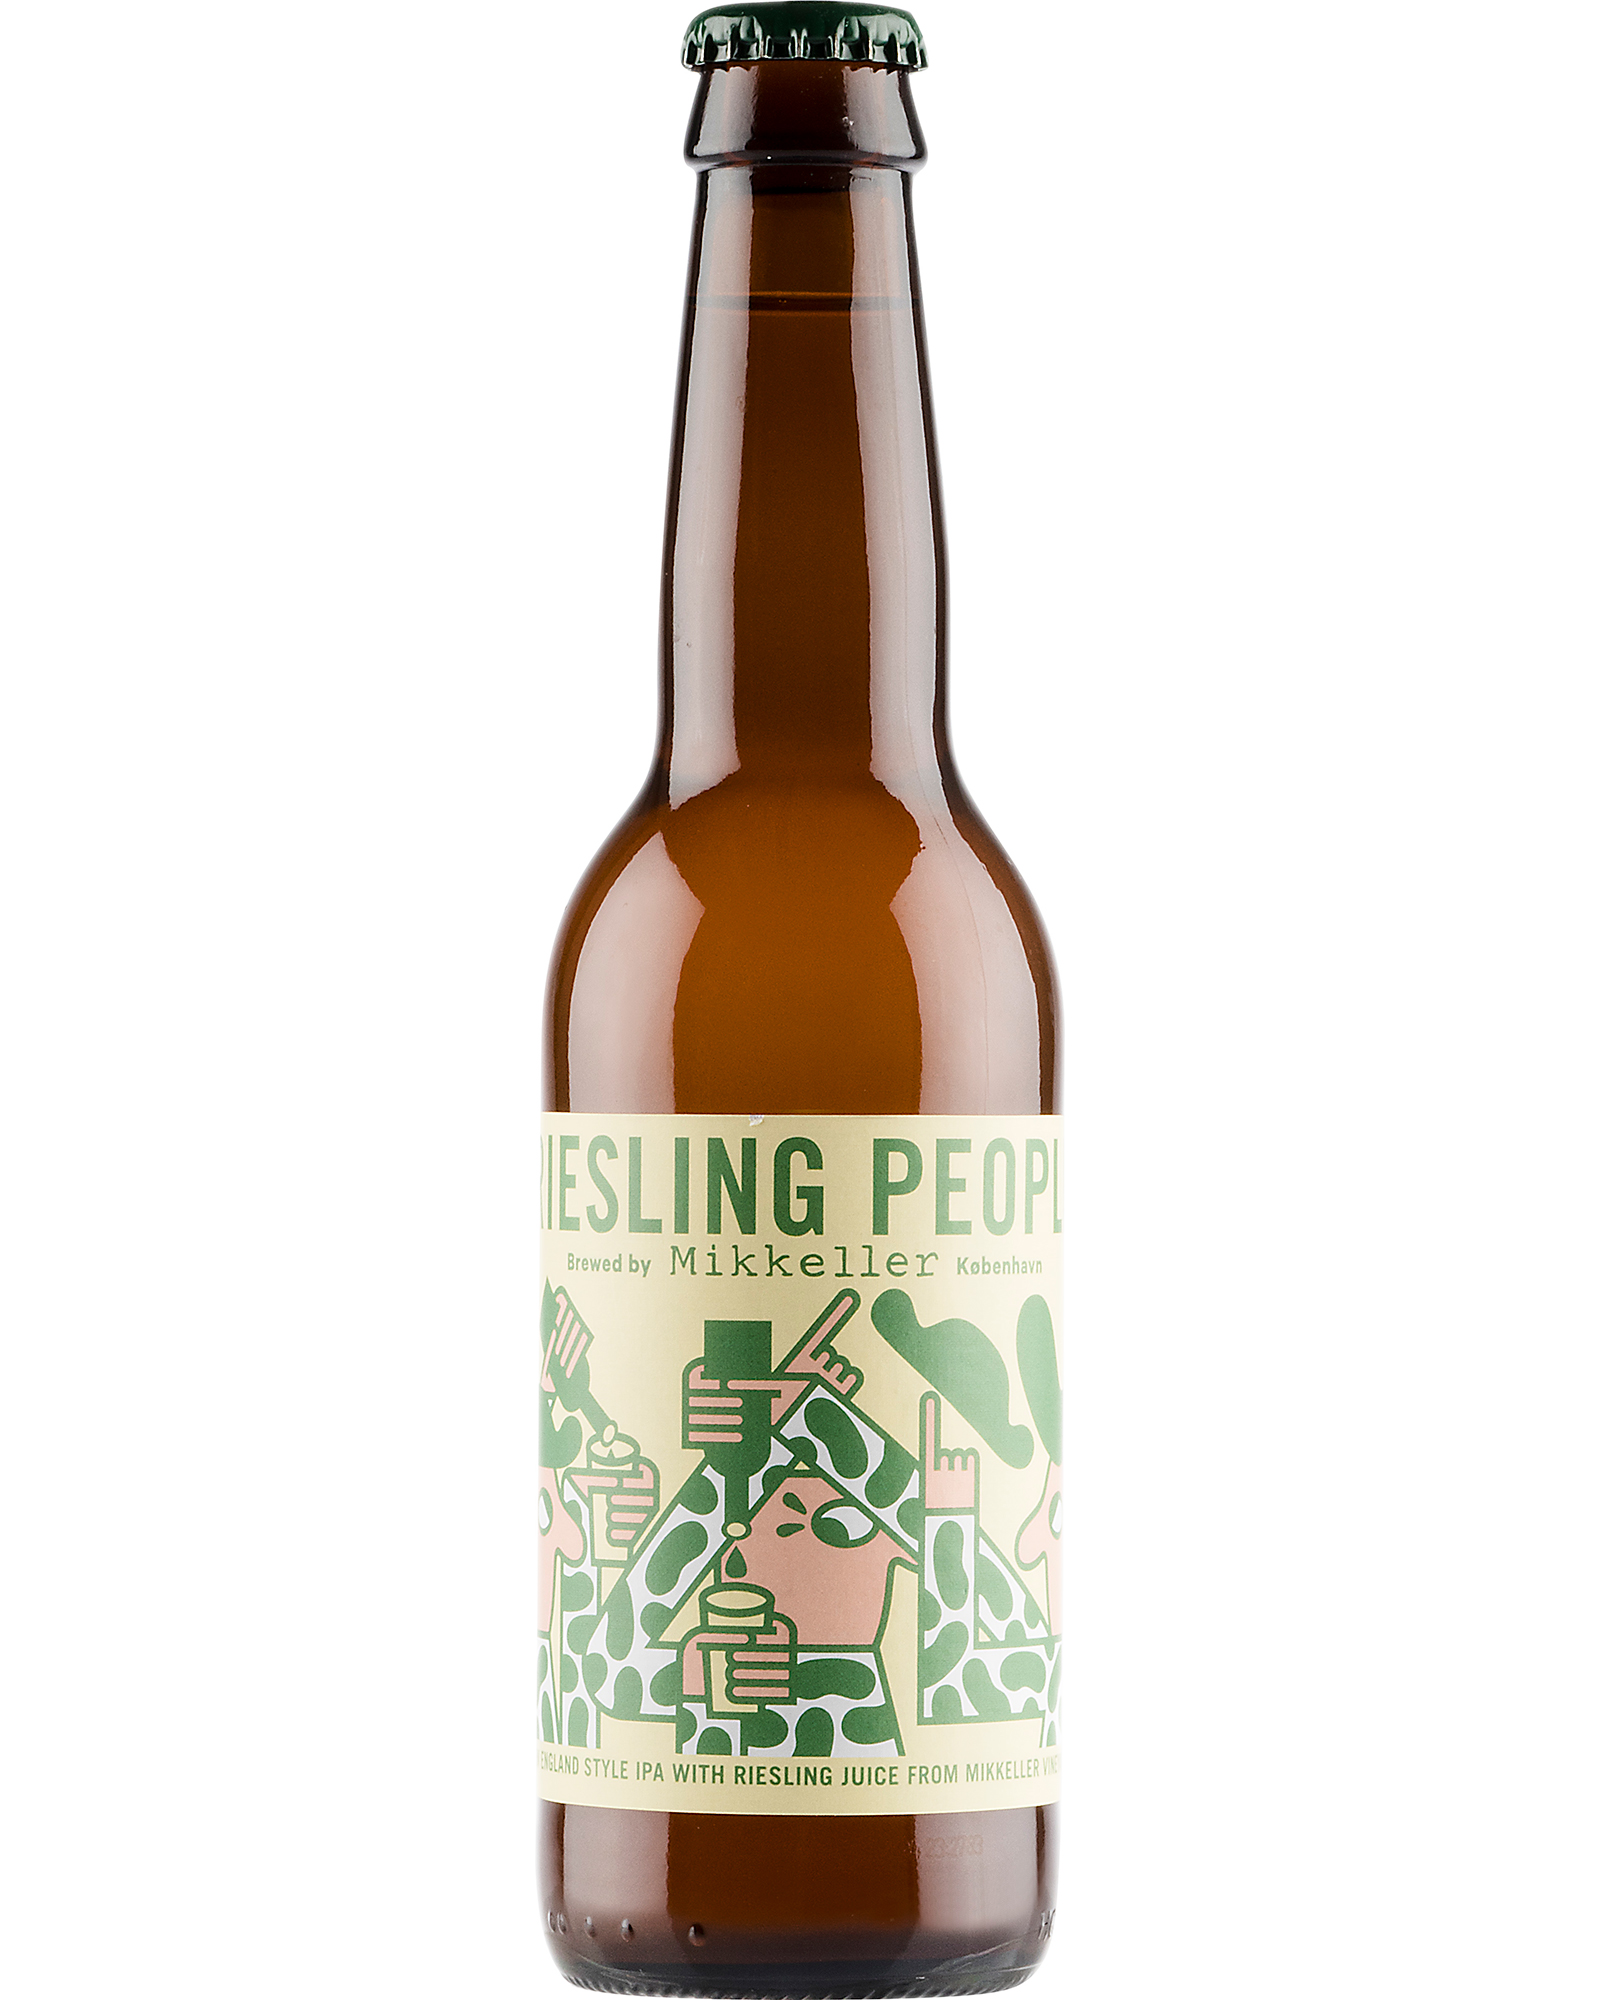 Mikkeller Riesling People New England Style IPA